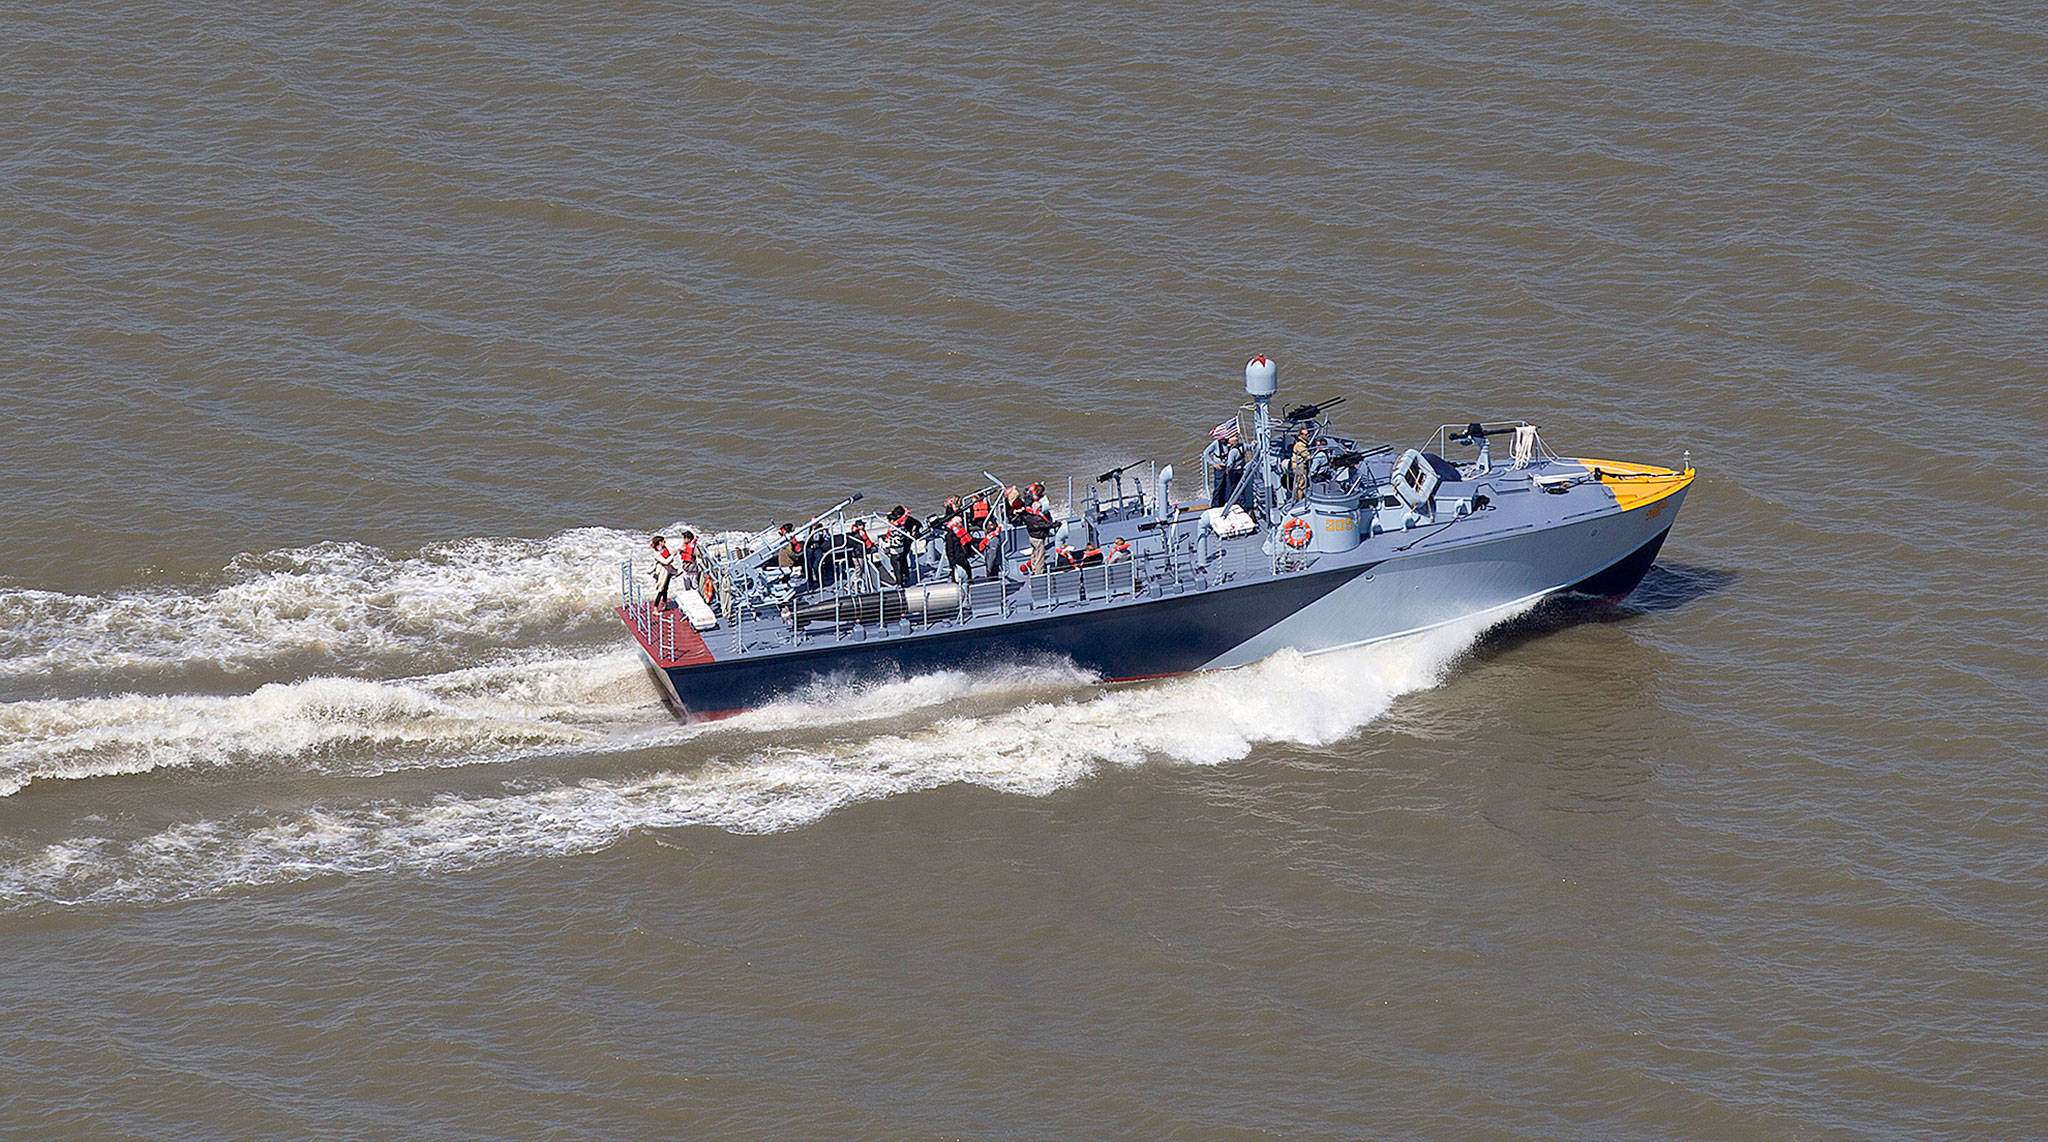 The PT 305 cruises with guests Thursday on Lake Pontchartrain, where she was originally tested by Higgins Industries more than 70 years ago, in New Orleans. (AP Photo/Gerald Herbert)